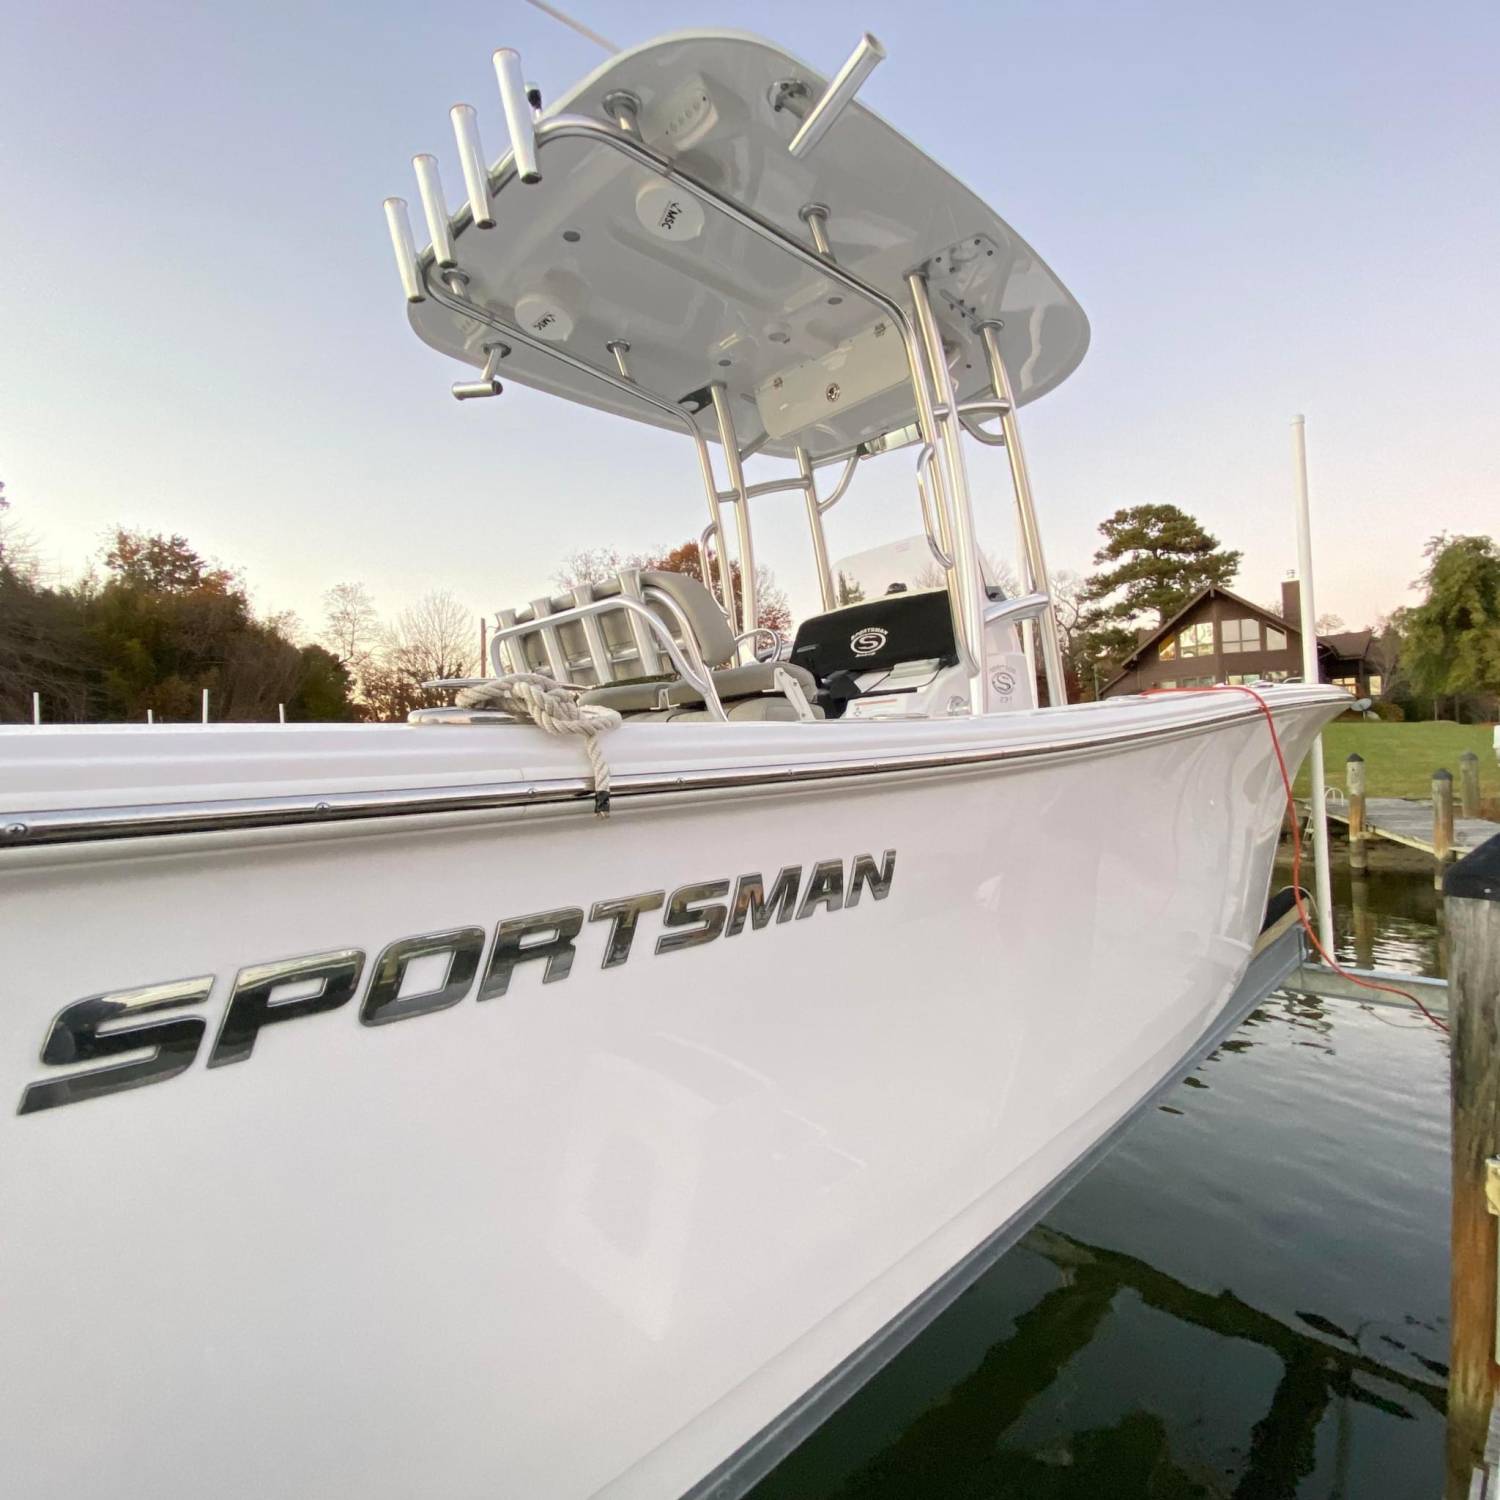 Title: Chillin - On board their Sportsman Heritage 231 Center Console - Location: Solomons Island Md. Participating in the Photo Contest #SportsmanSeptember2023